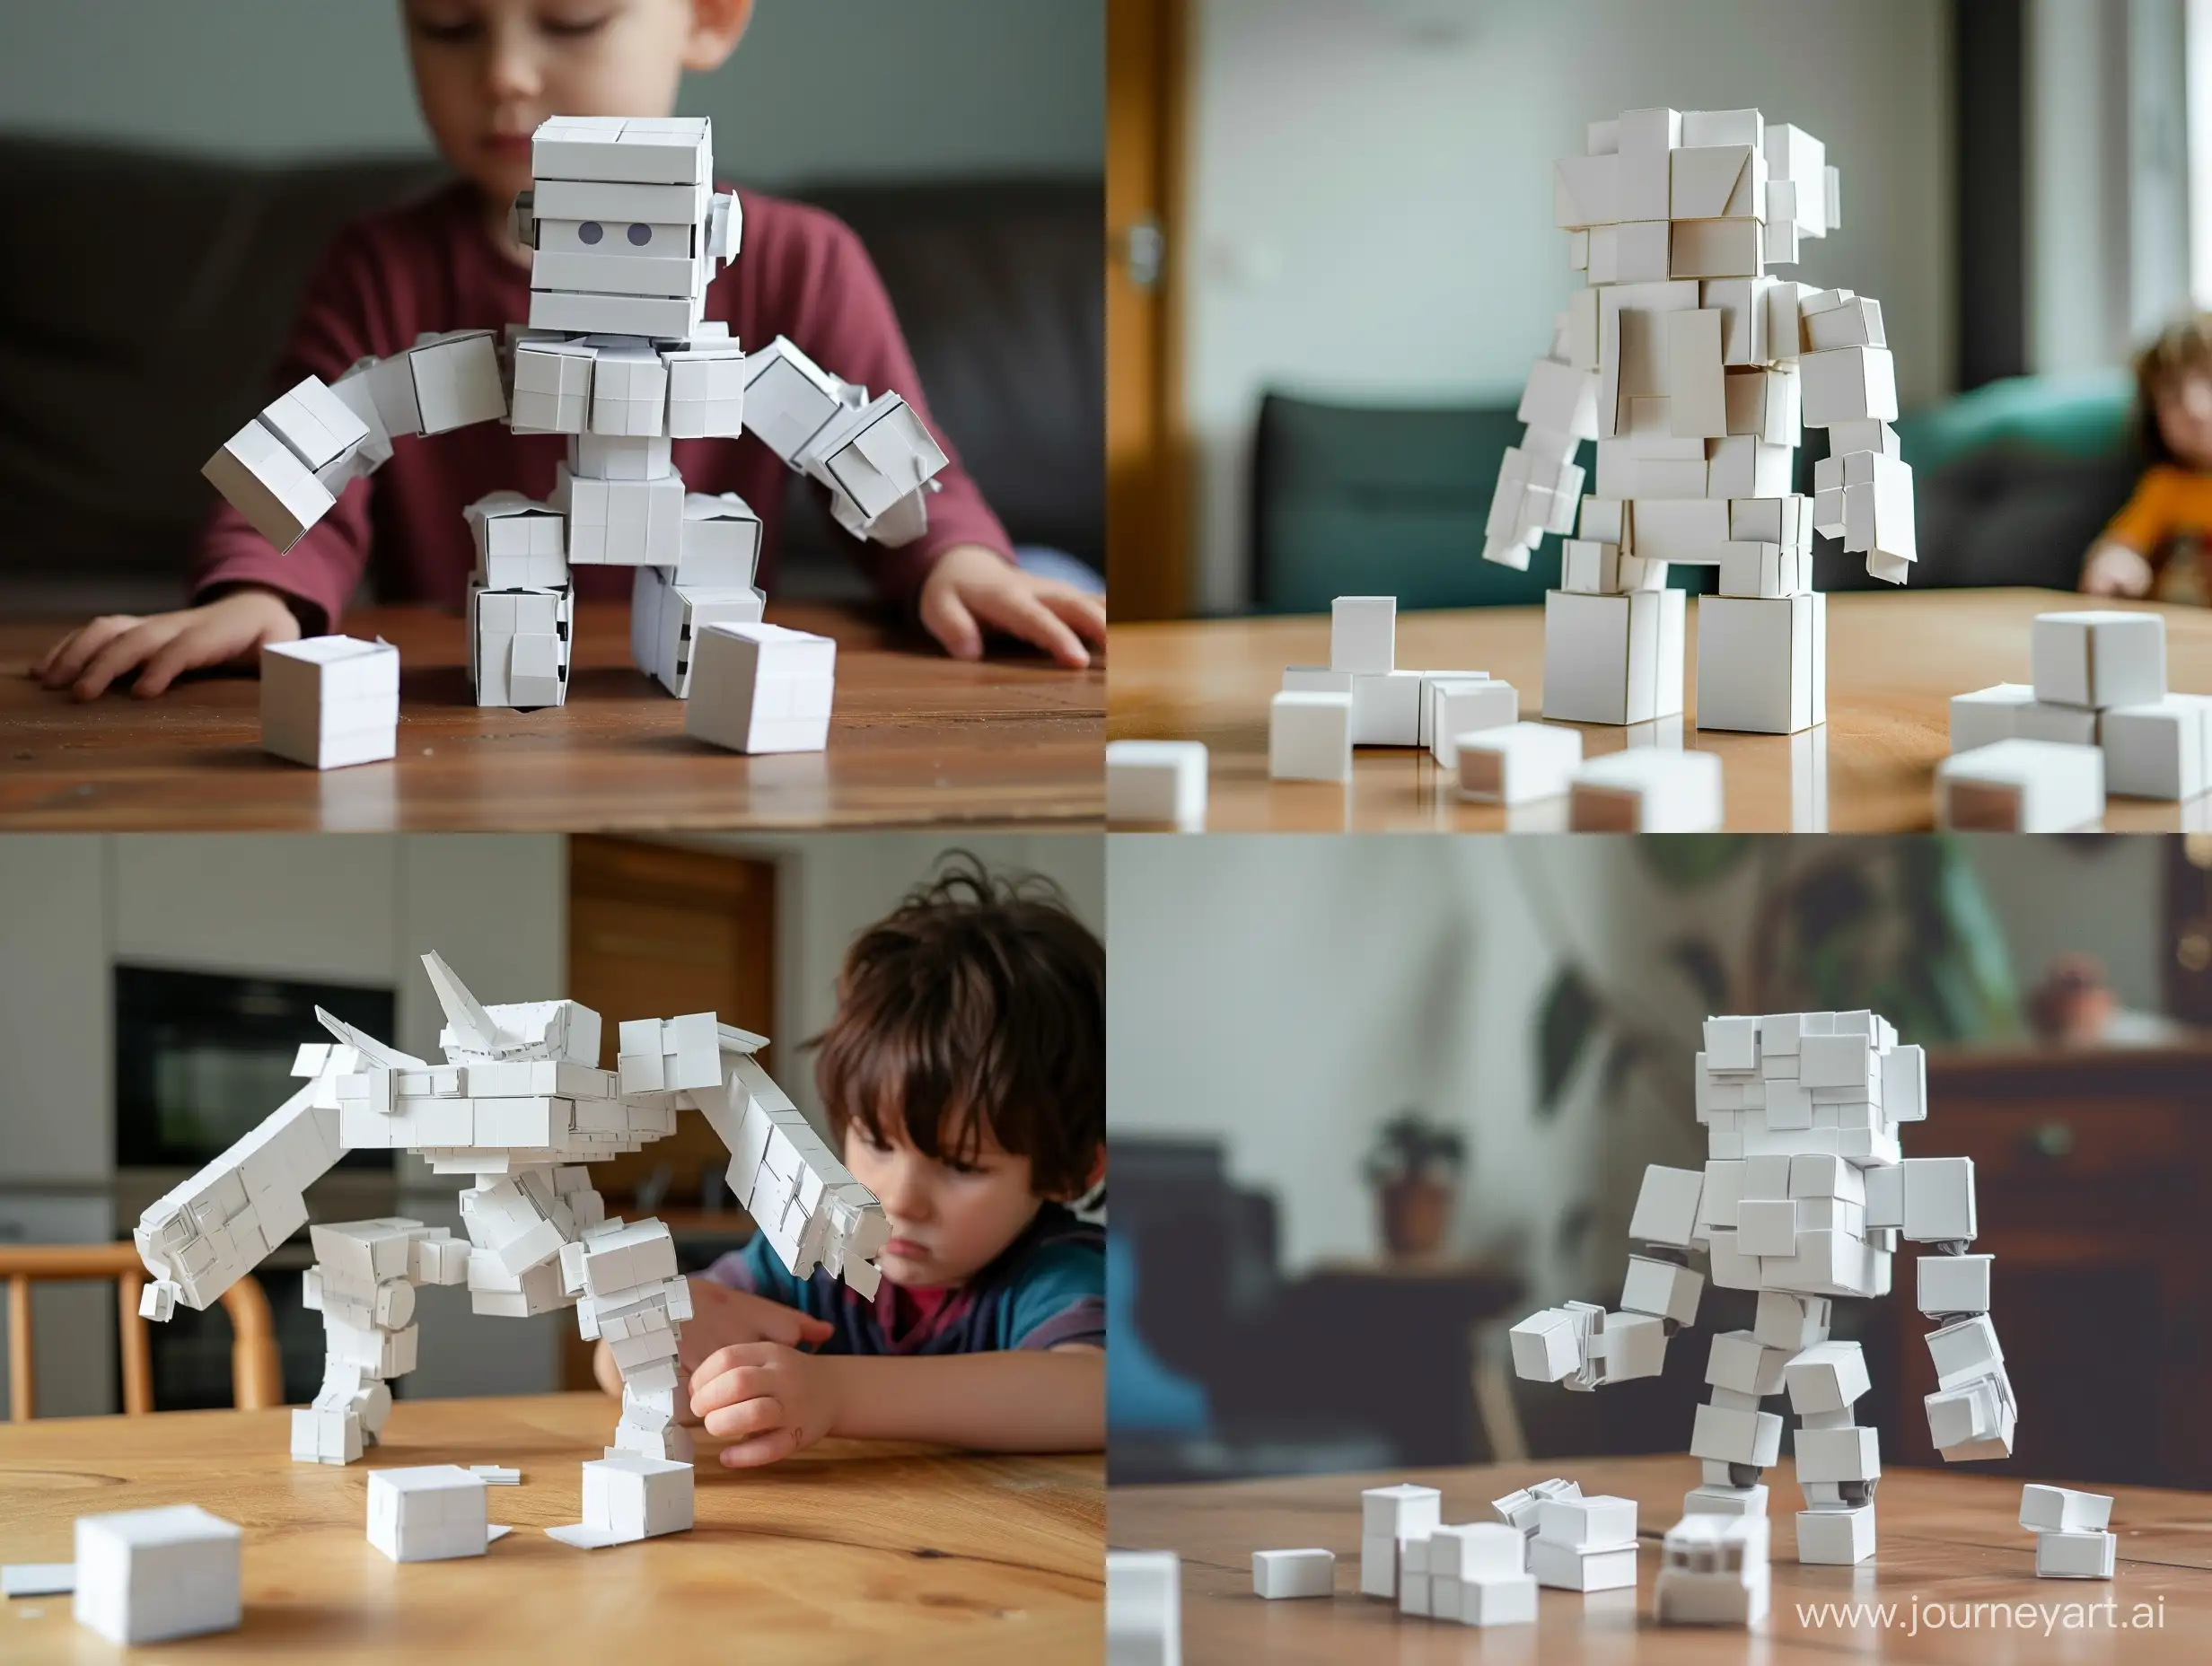 ChildAssembled-Paper-Robot-on-Table-Realistic-DIY-Photography